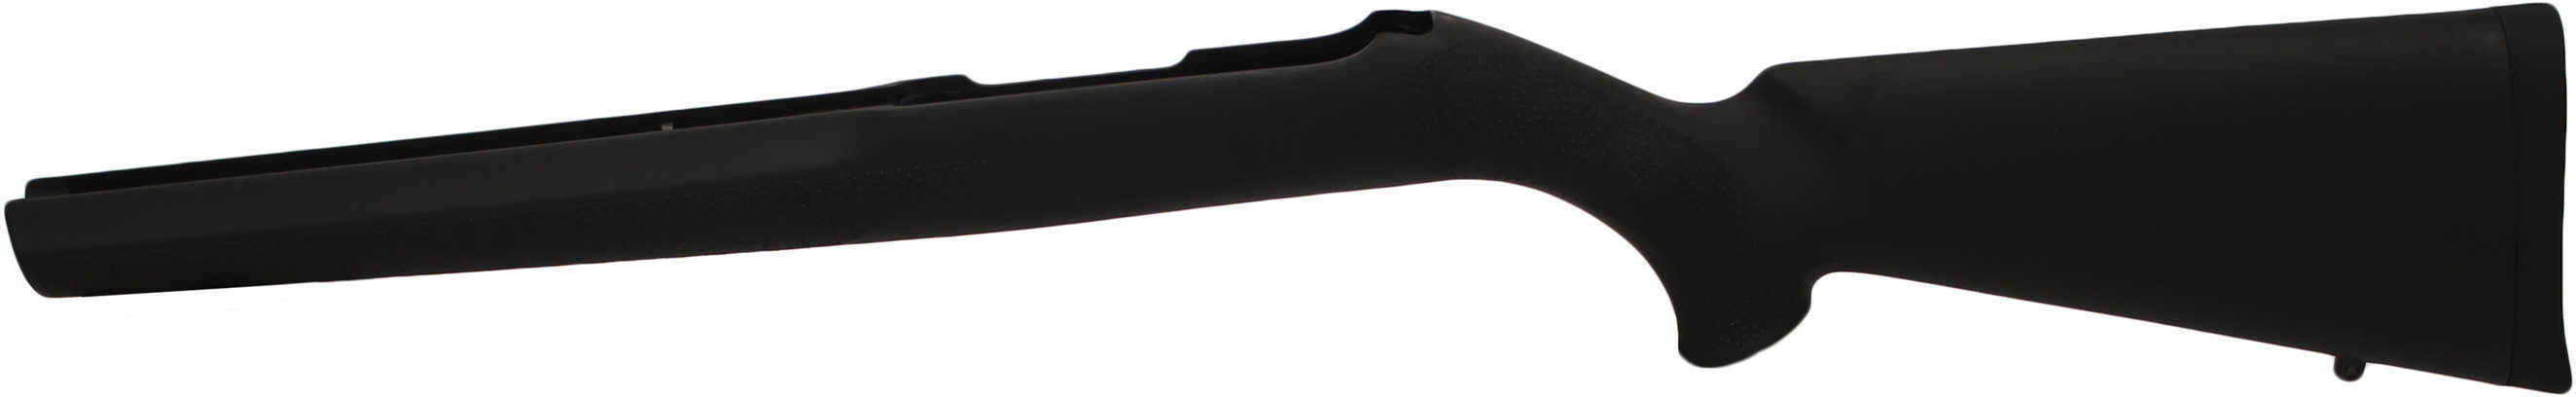 Hogue Grips Stock Ruger® 10/22® Bull Bbl